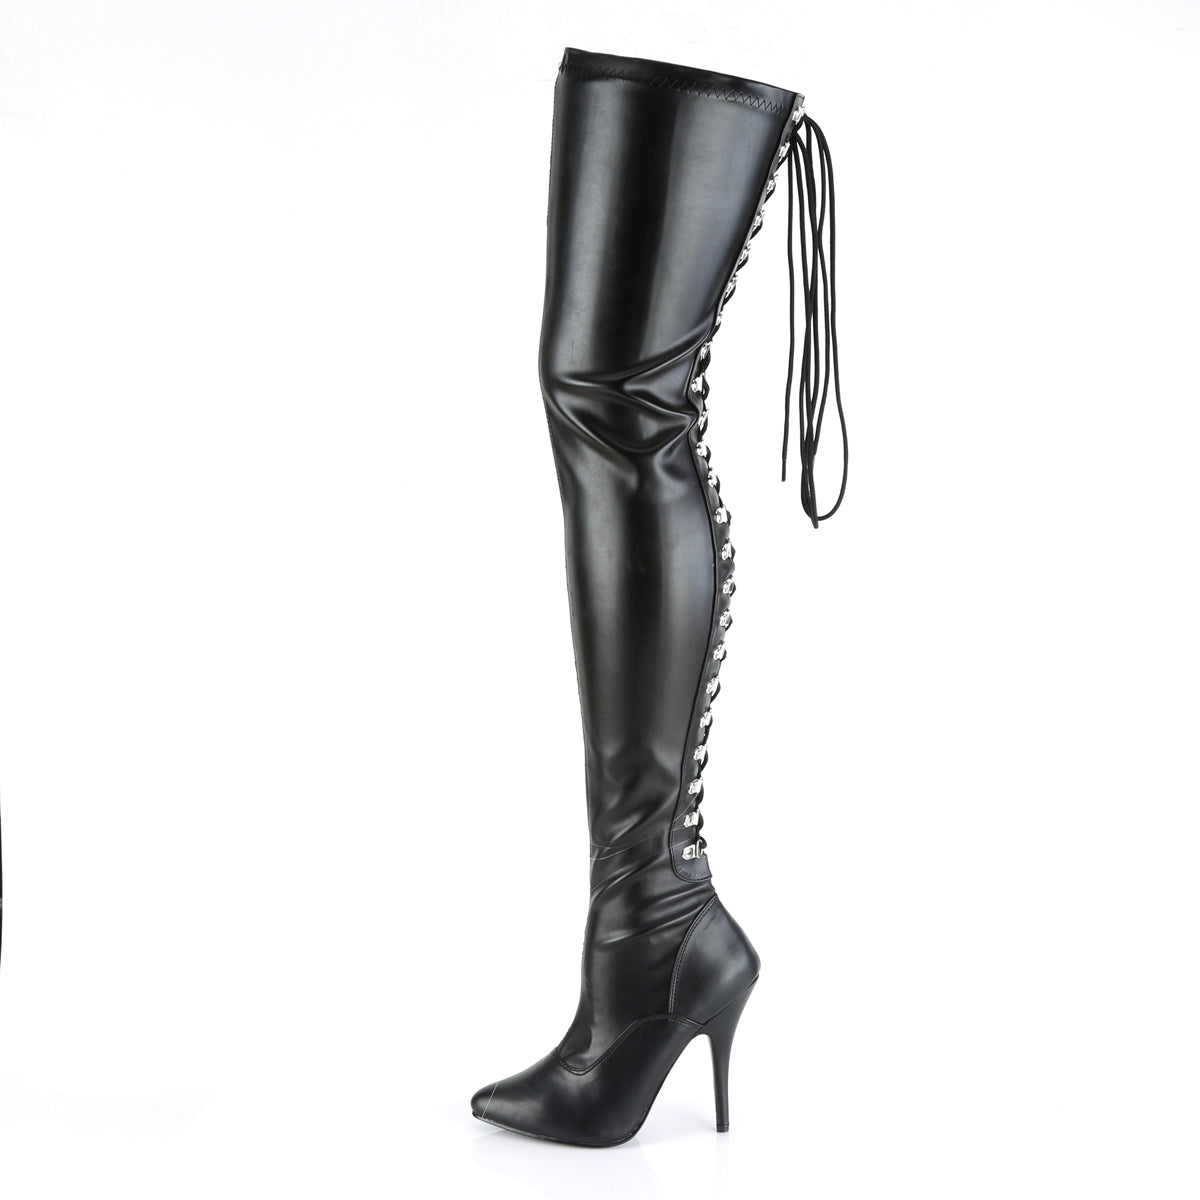 SEDUCE-3063 Pleaser Thigh Boots 5" Heel Black Fetish Shoes-Pleaser- Sexy Shoes Pole Dance Heels